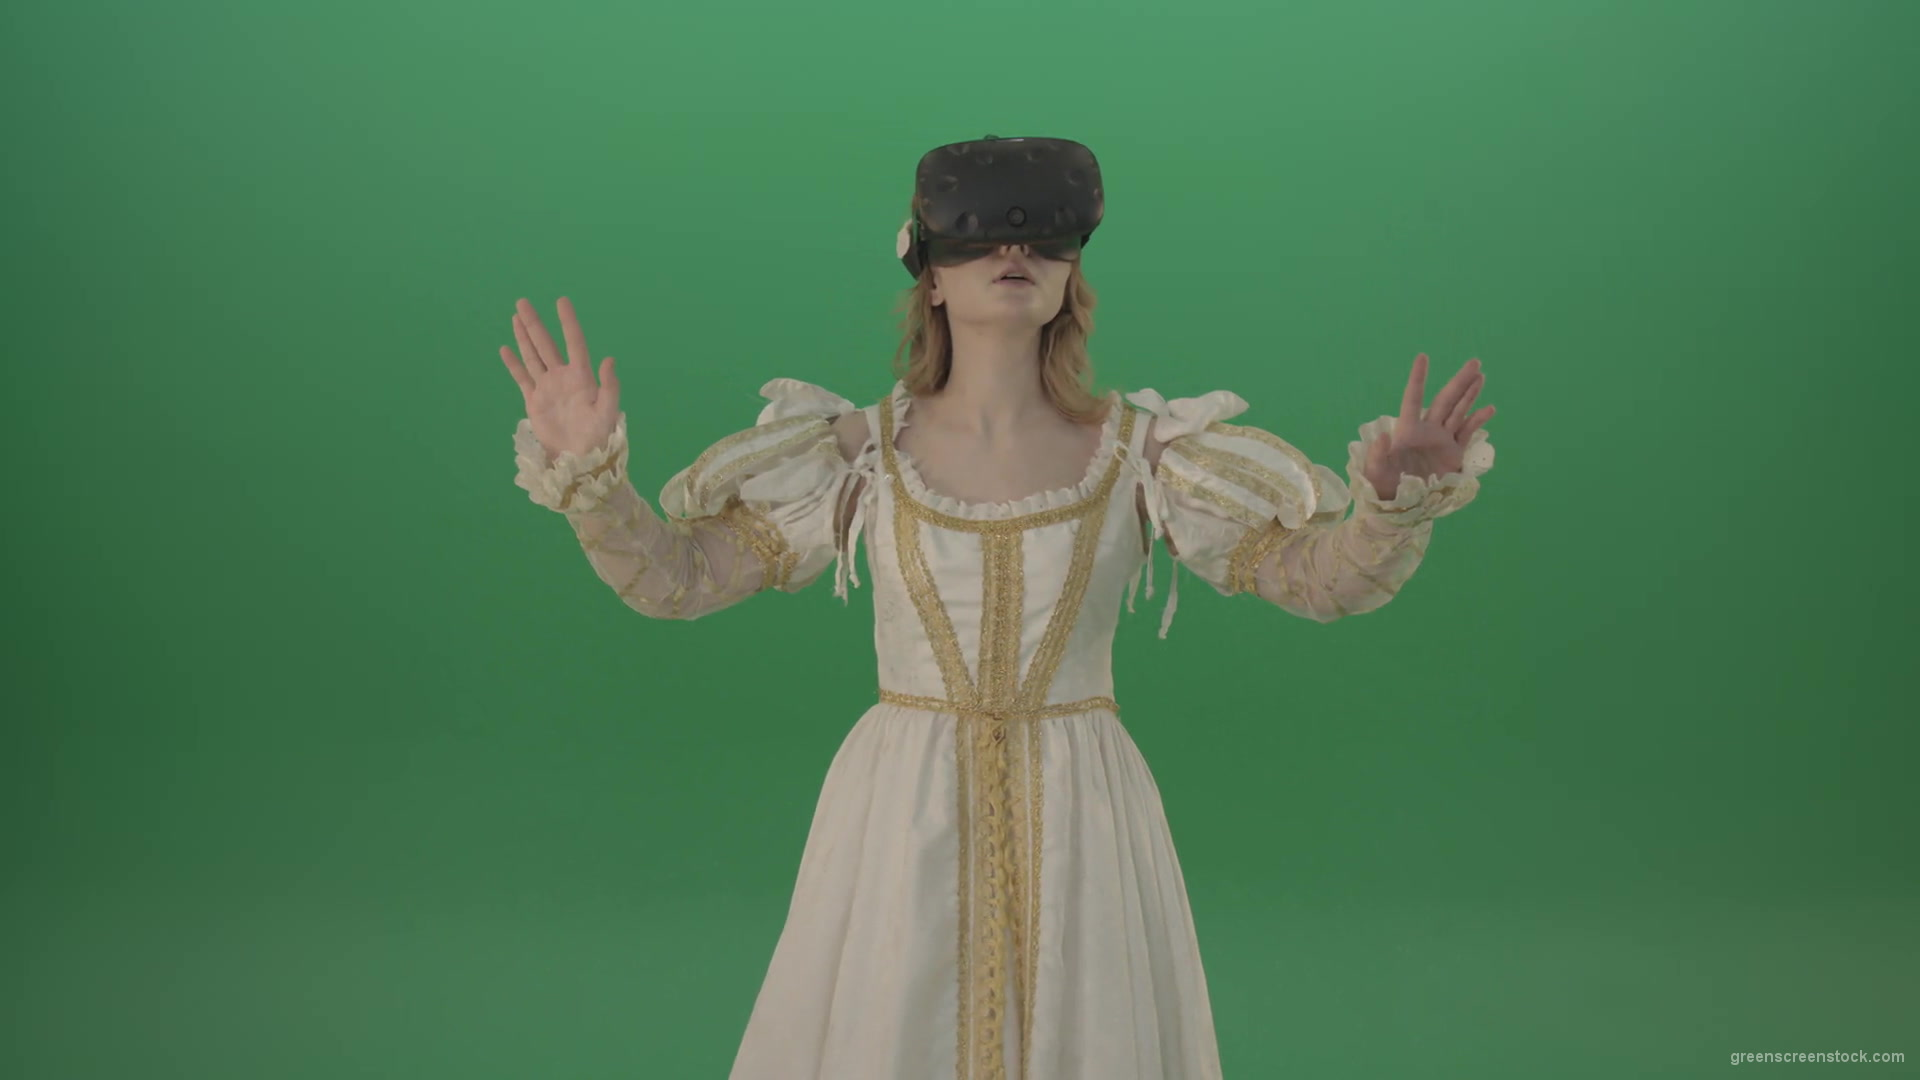 Girl-in-3-in-virtual-reality-has-swallowed-up-in-another-three-dimensional-world-isolated-on-green-screen-1920_004 Green Screen Stock